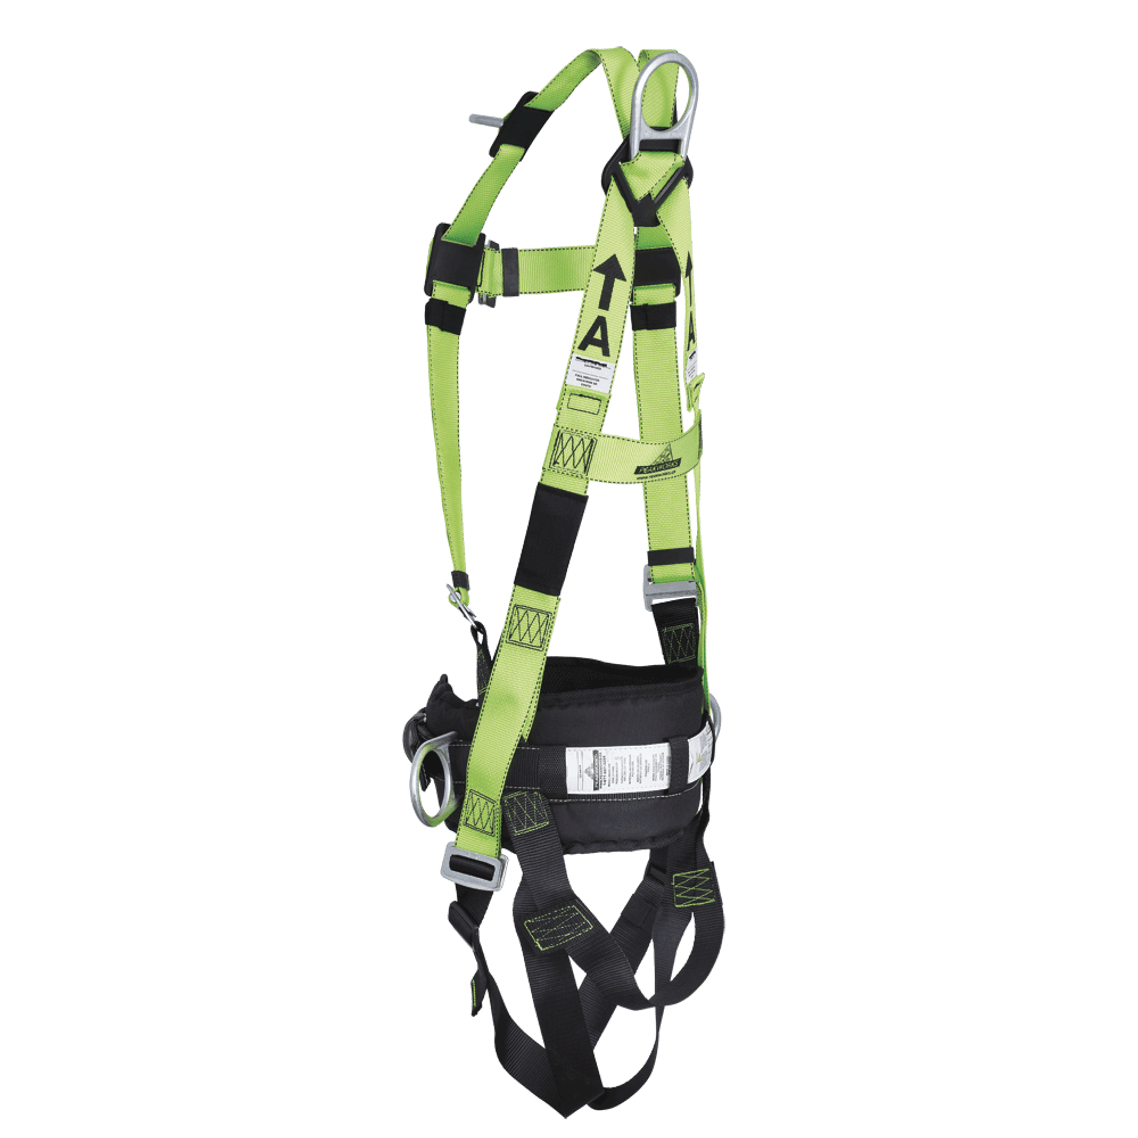 Peakworks FBH10000E1020 Contractor Harnesses with Positioning Belt - 5D - Class APE| Safetywear.ca